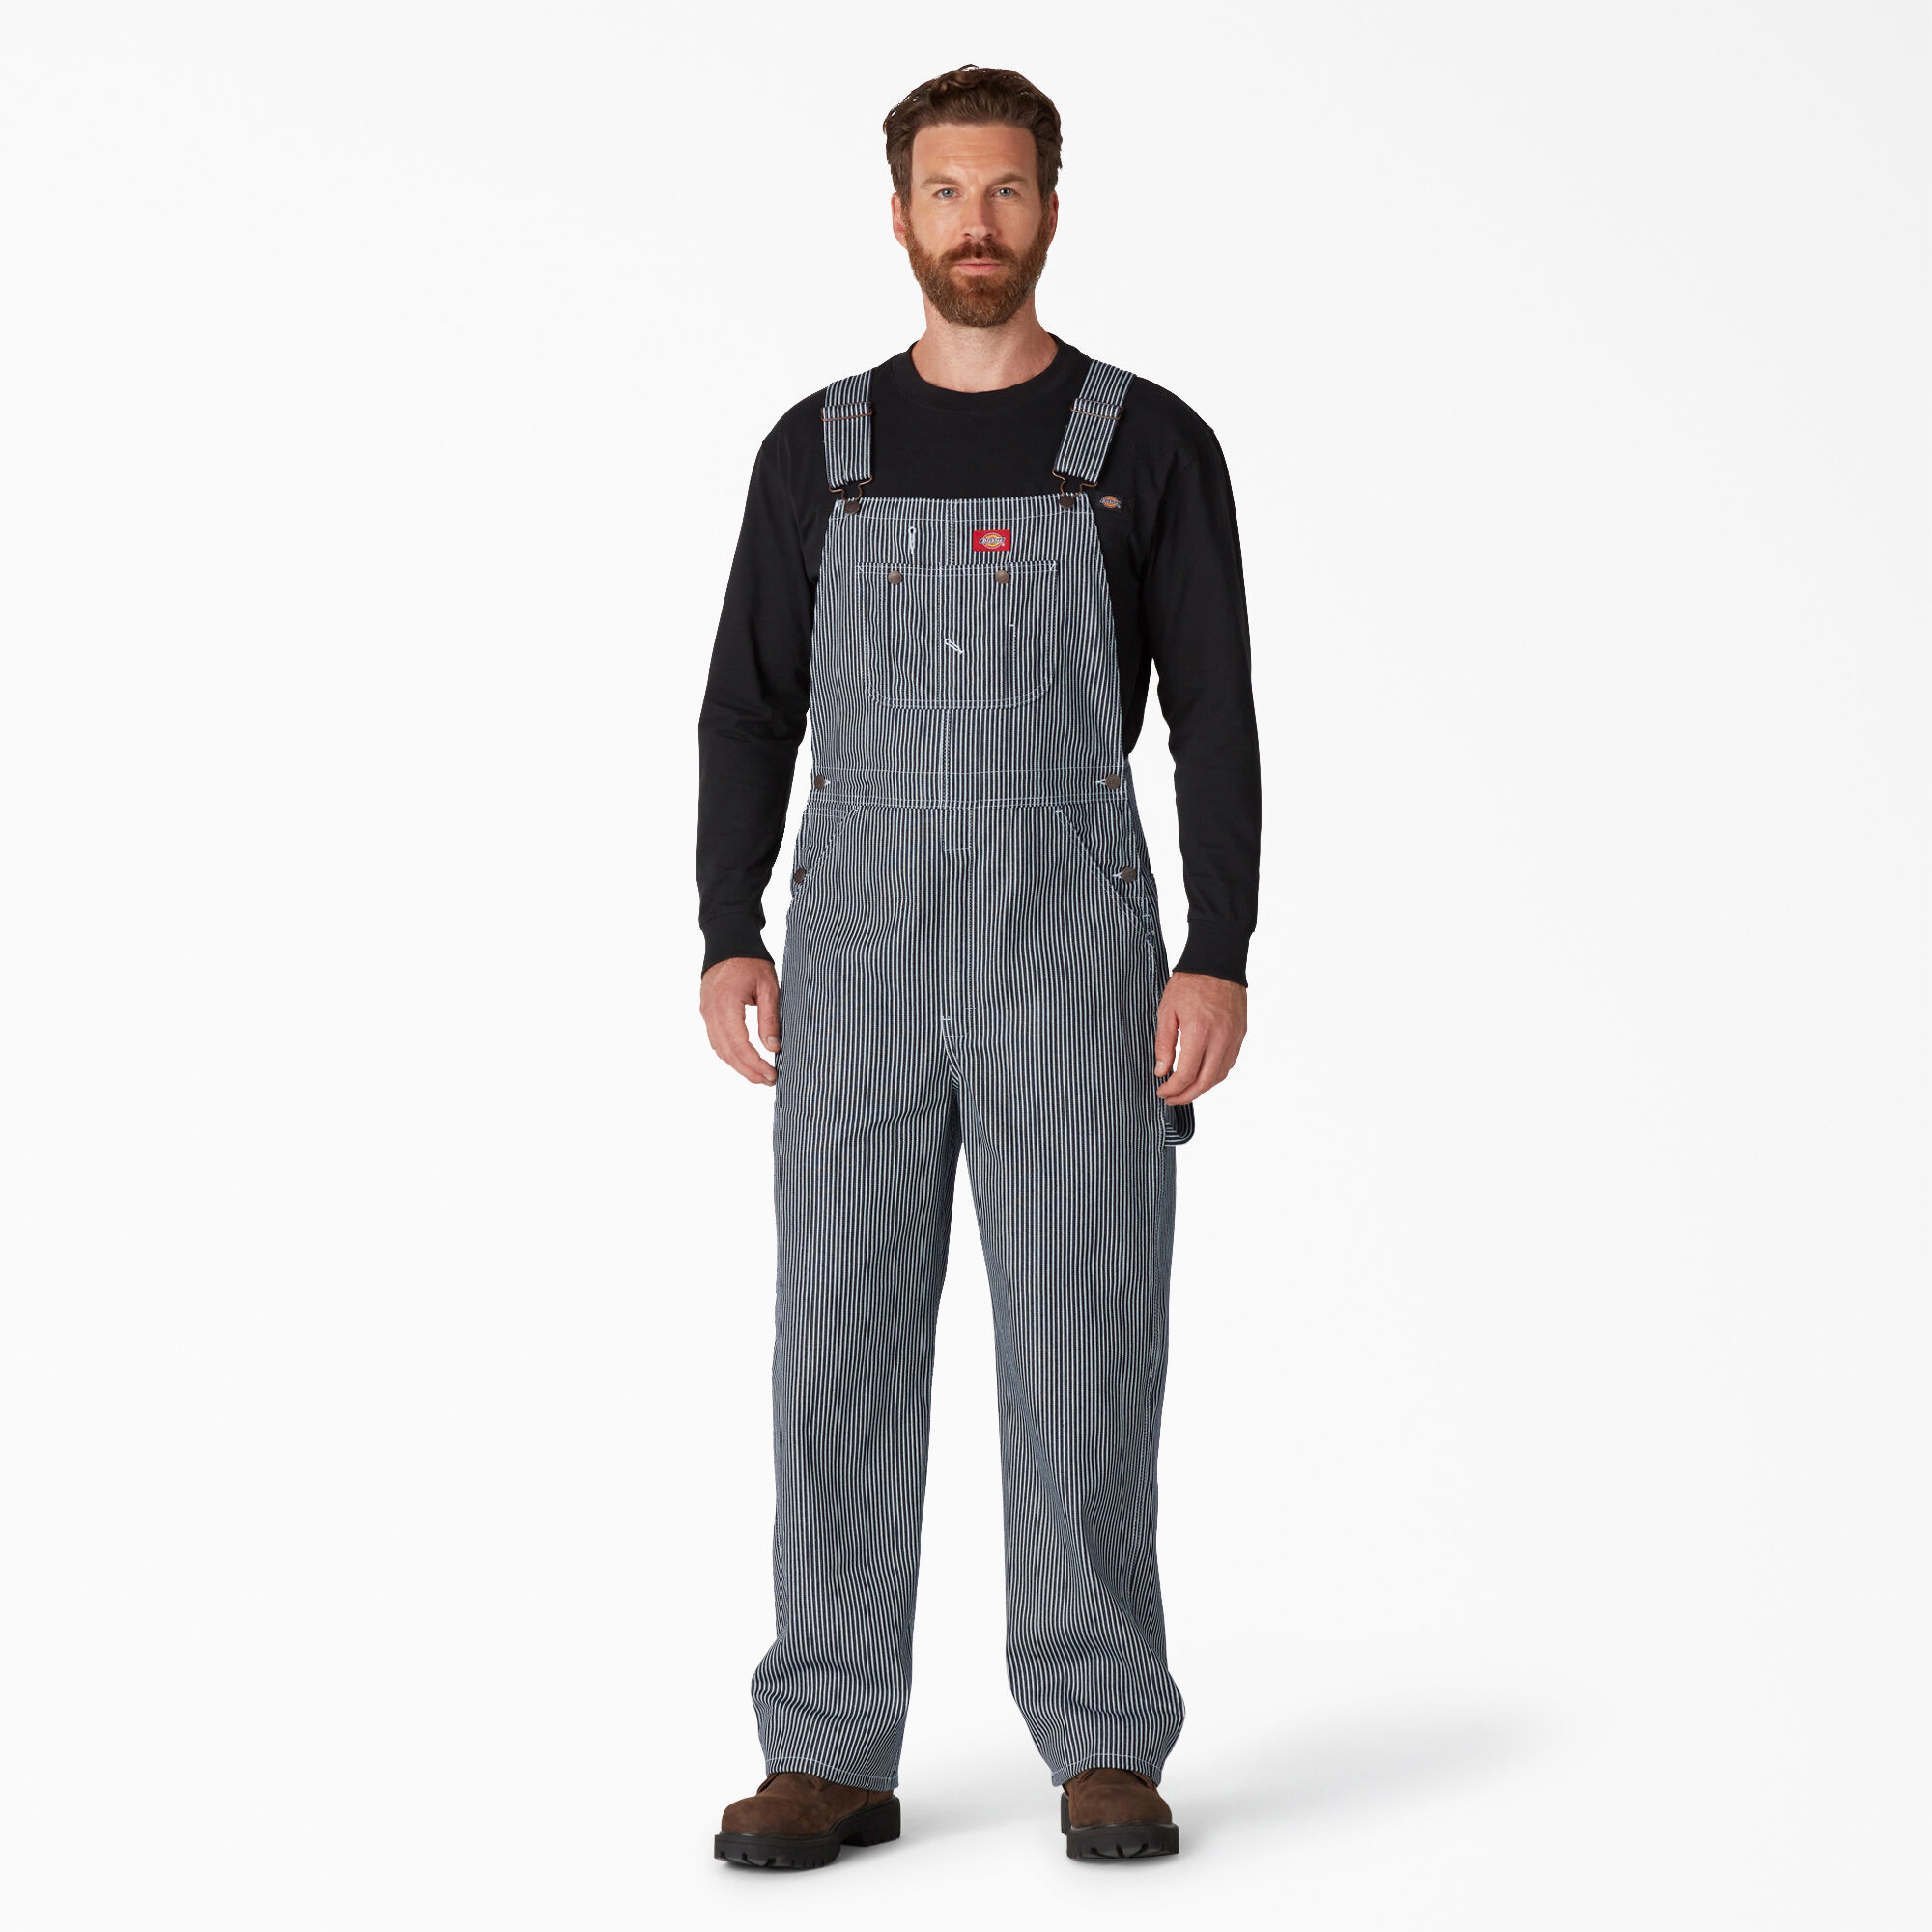 overall jumpsuit